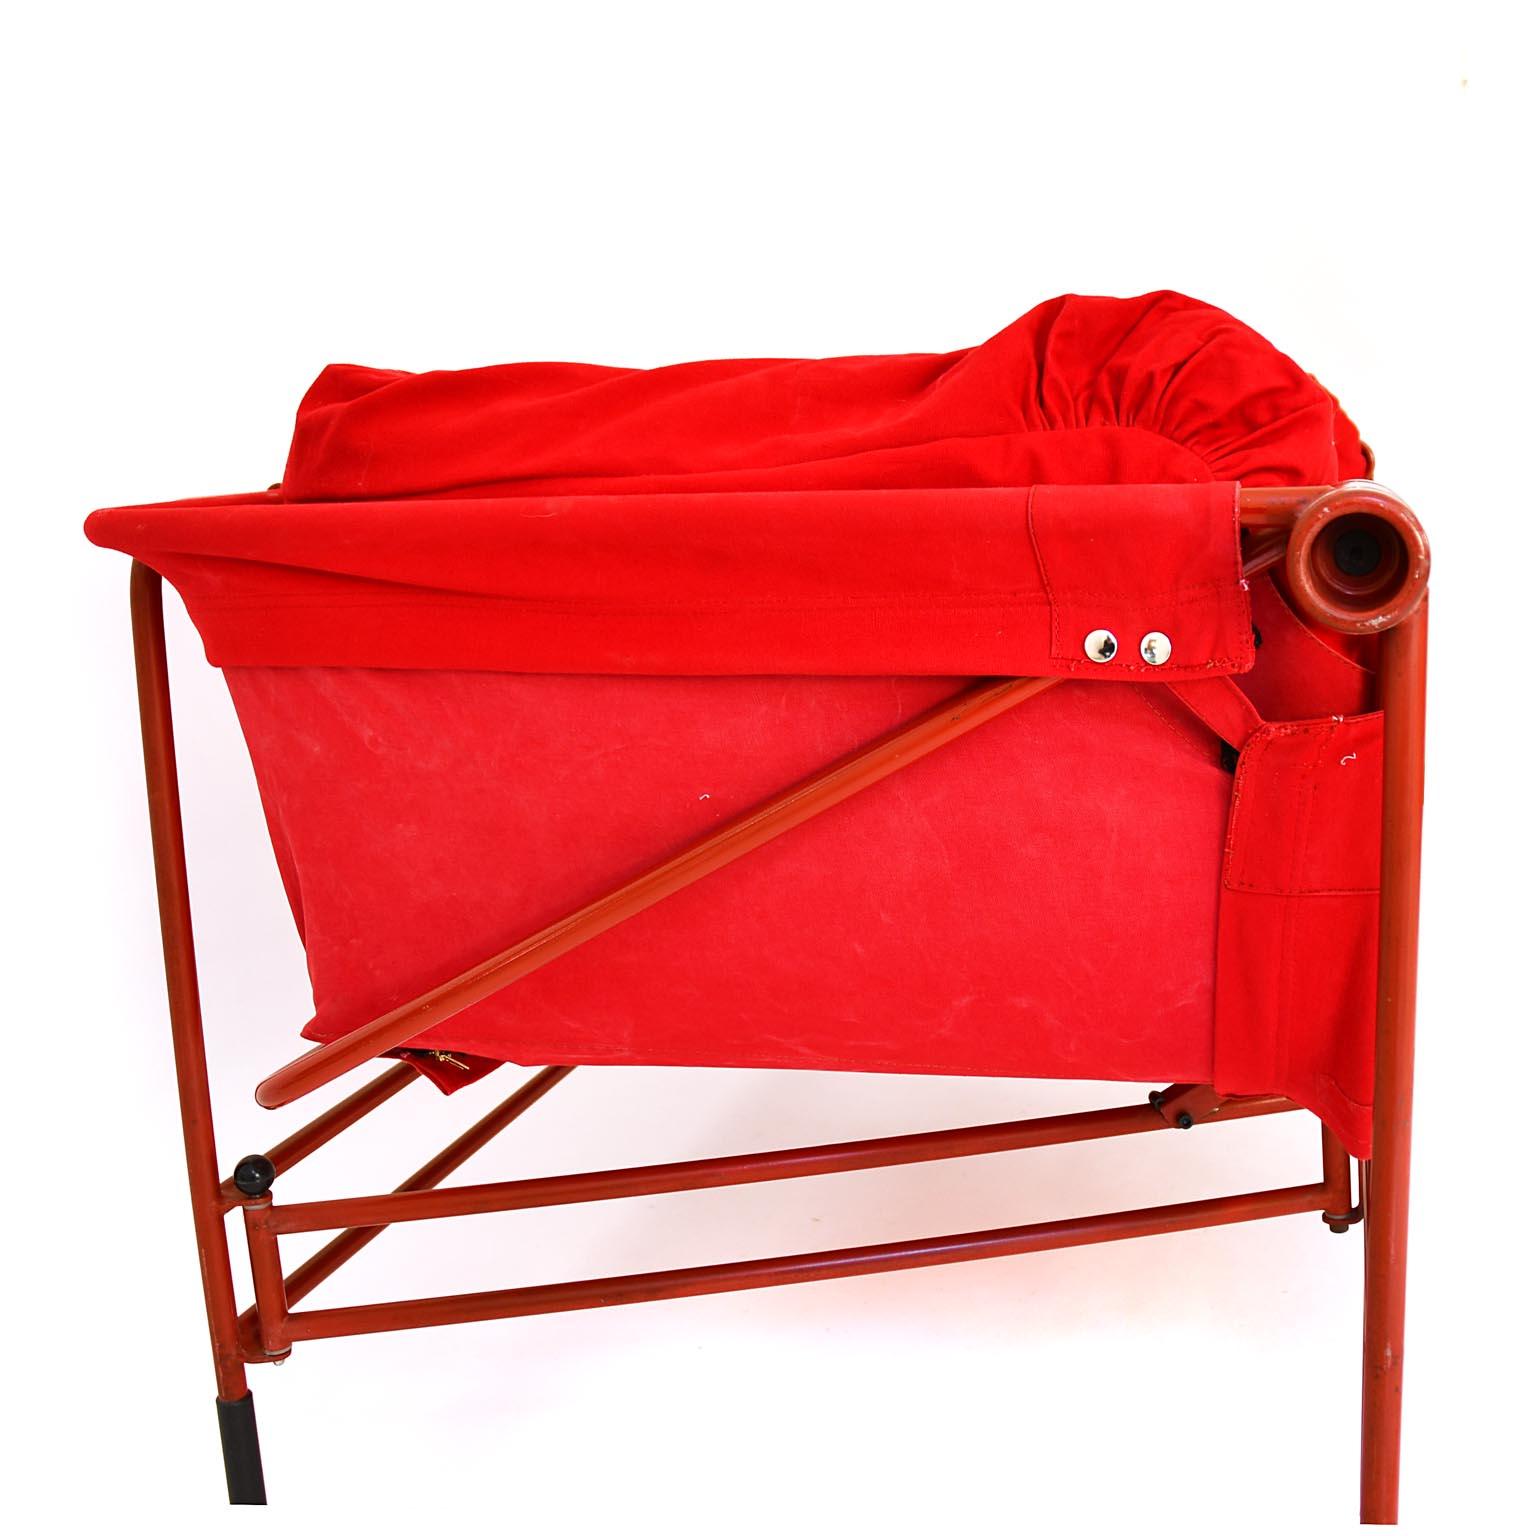 Bench Cabriolet 1980s Red Fabrik Metal Bruno Rota Italy 6